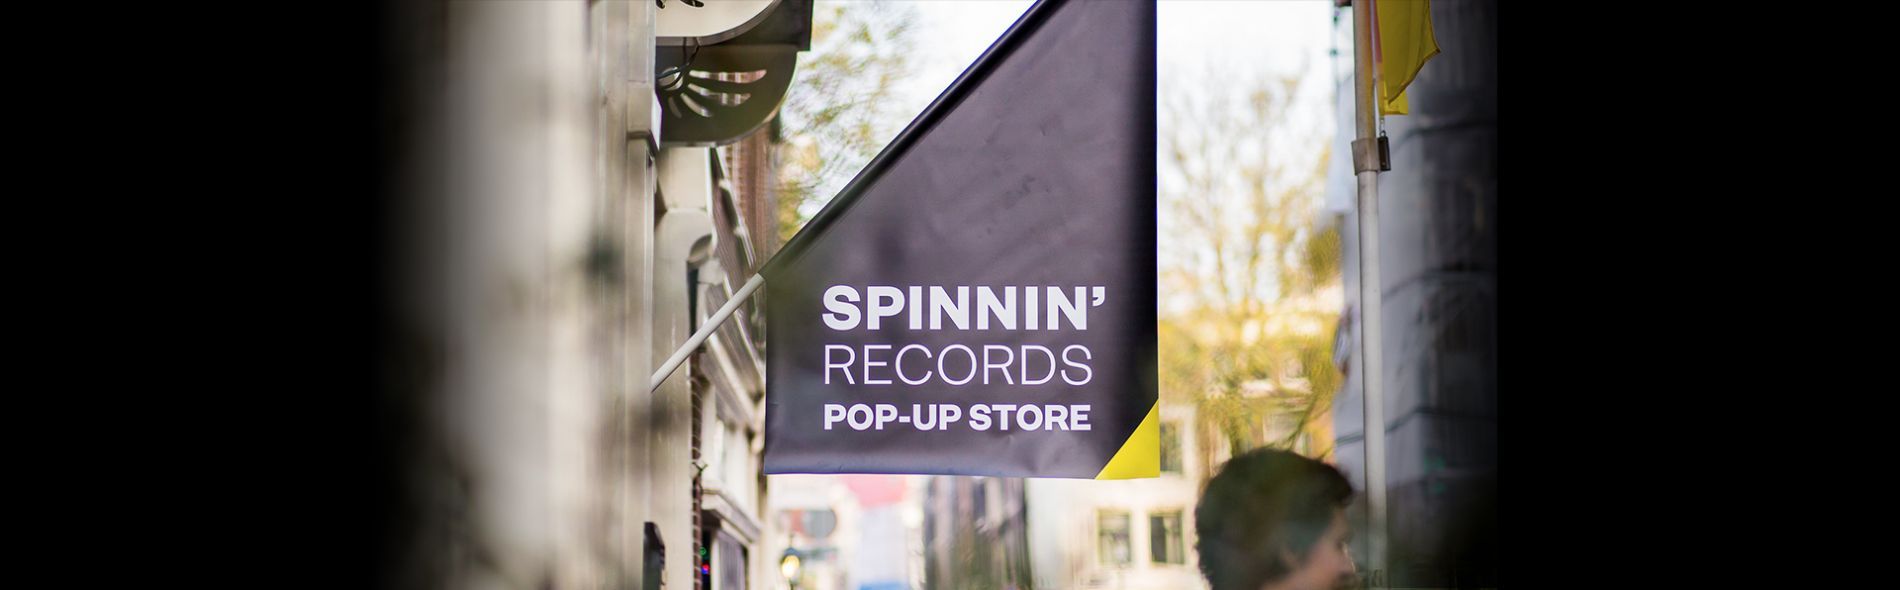 Spinnin' Records Pop-up store 2017